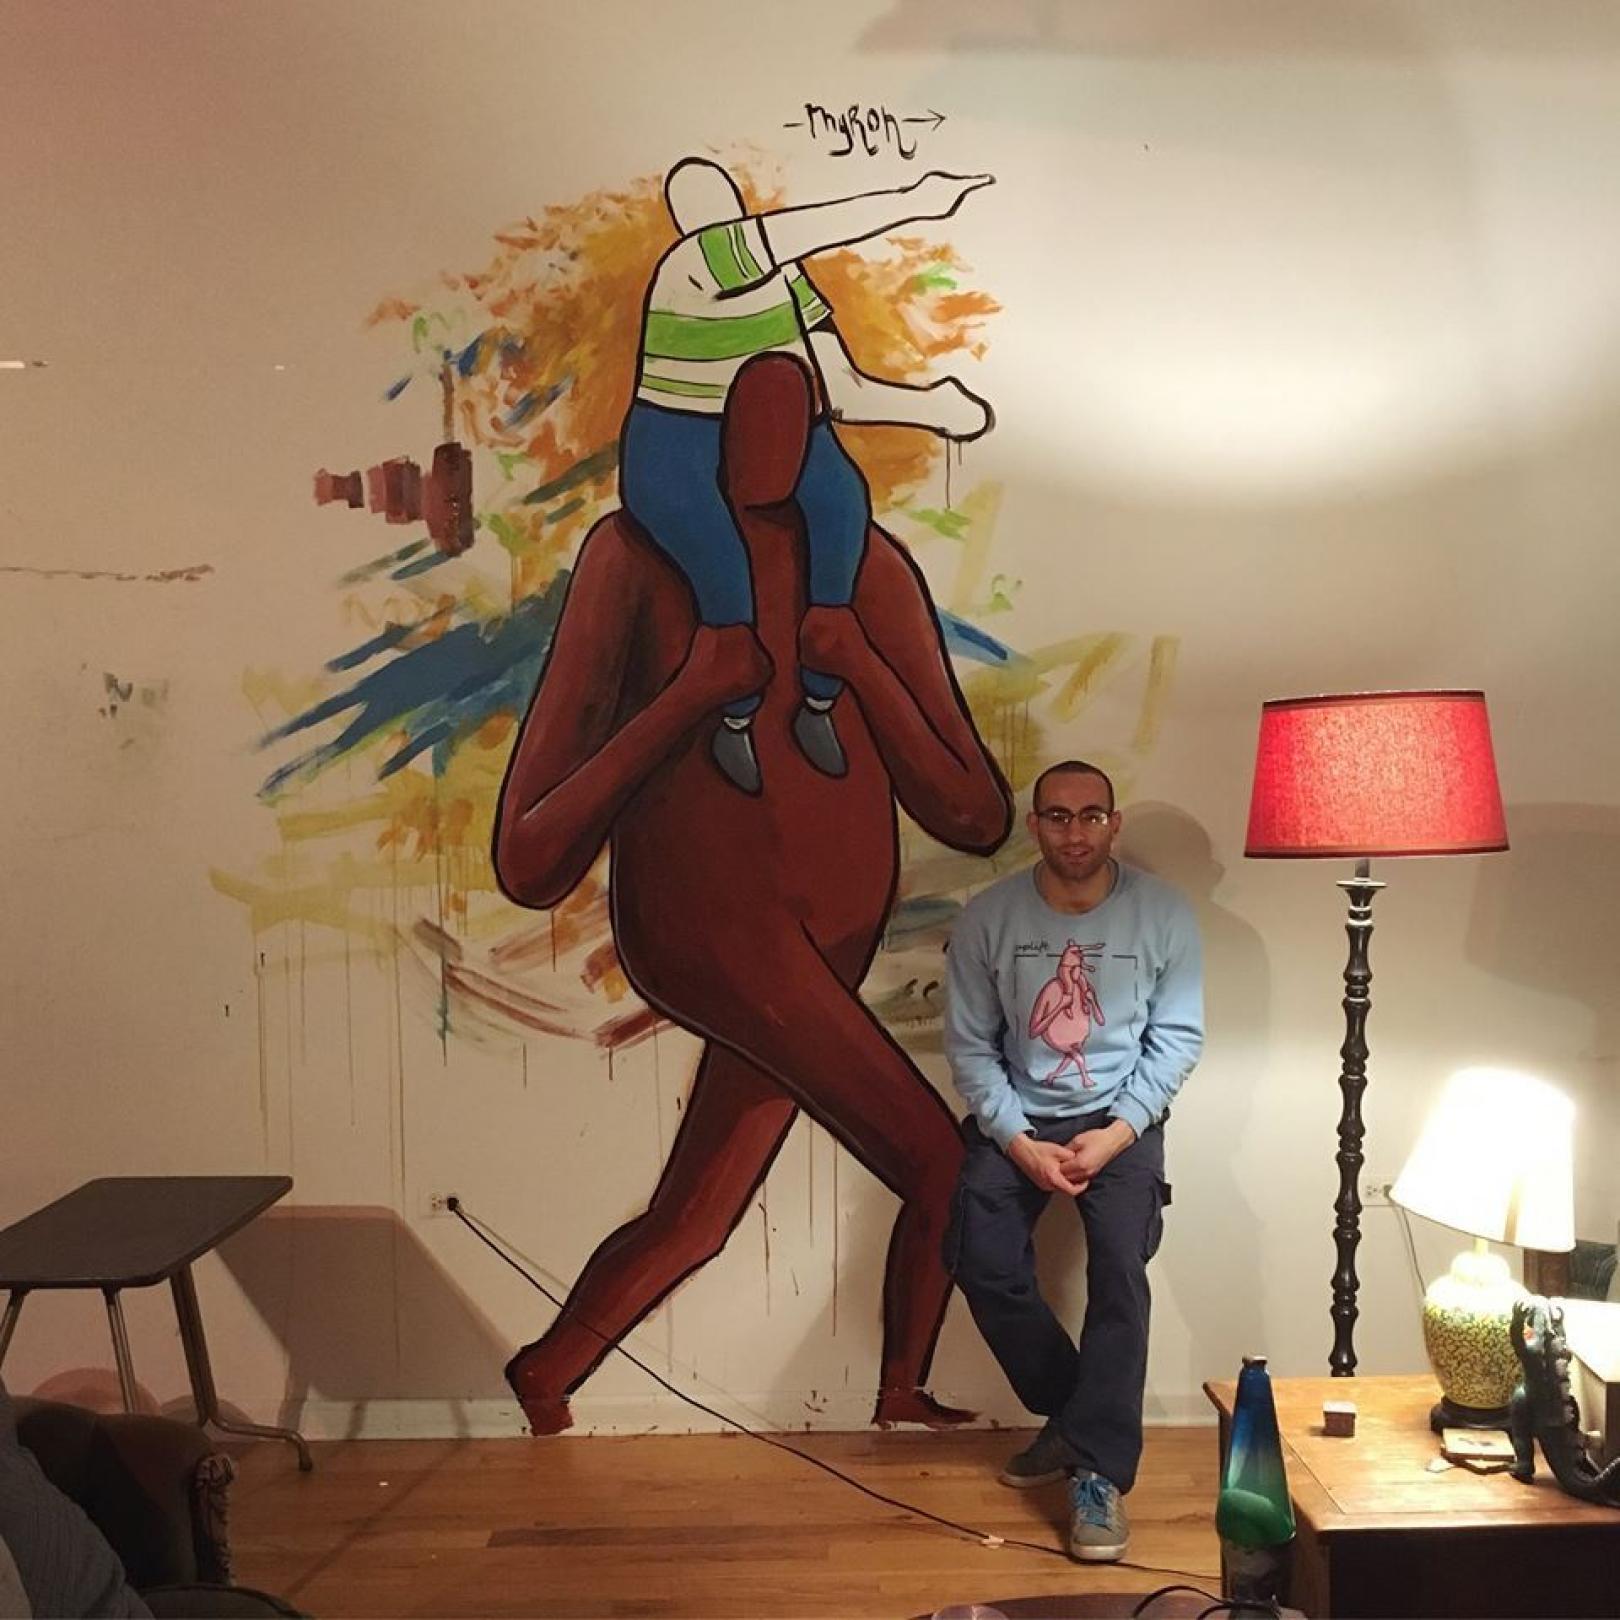 Myron sitting next to the mural in his house